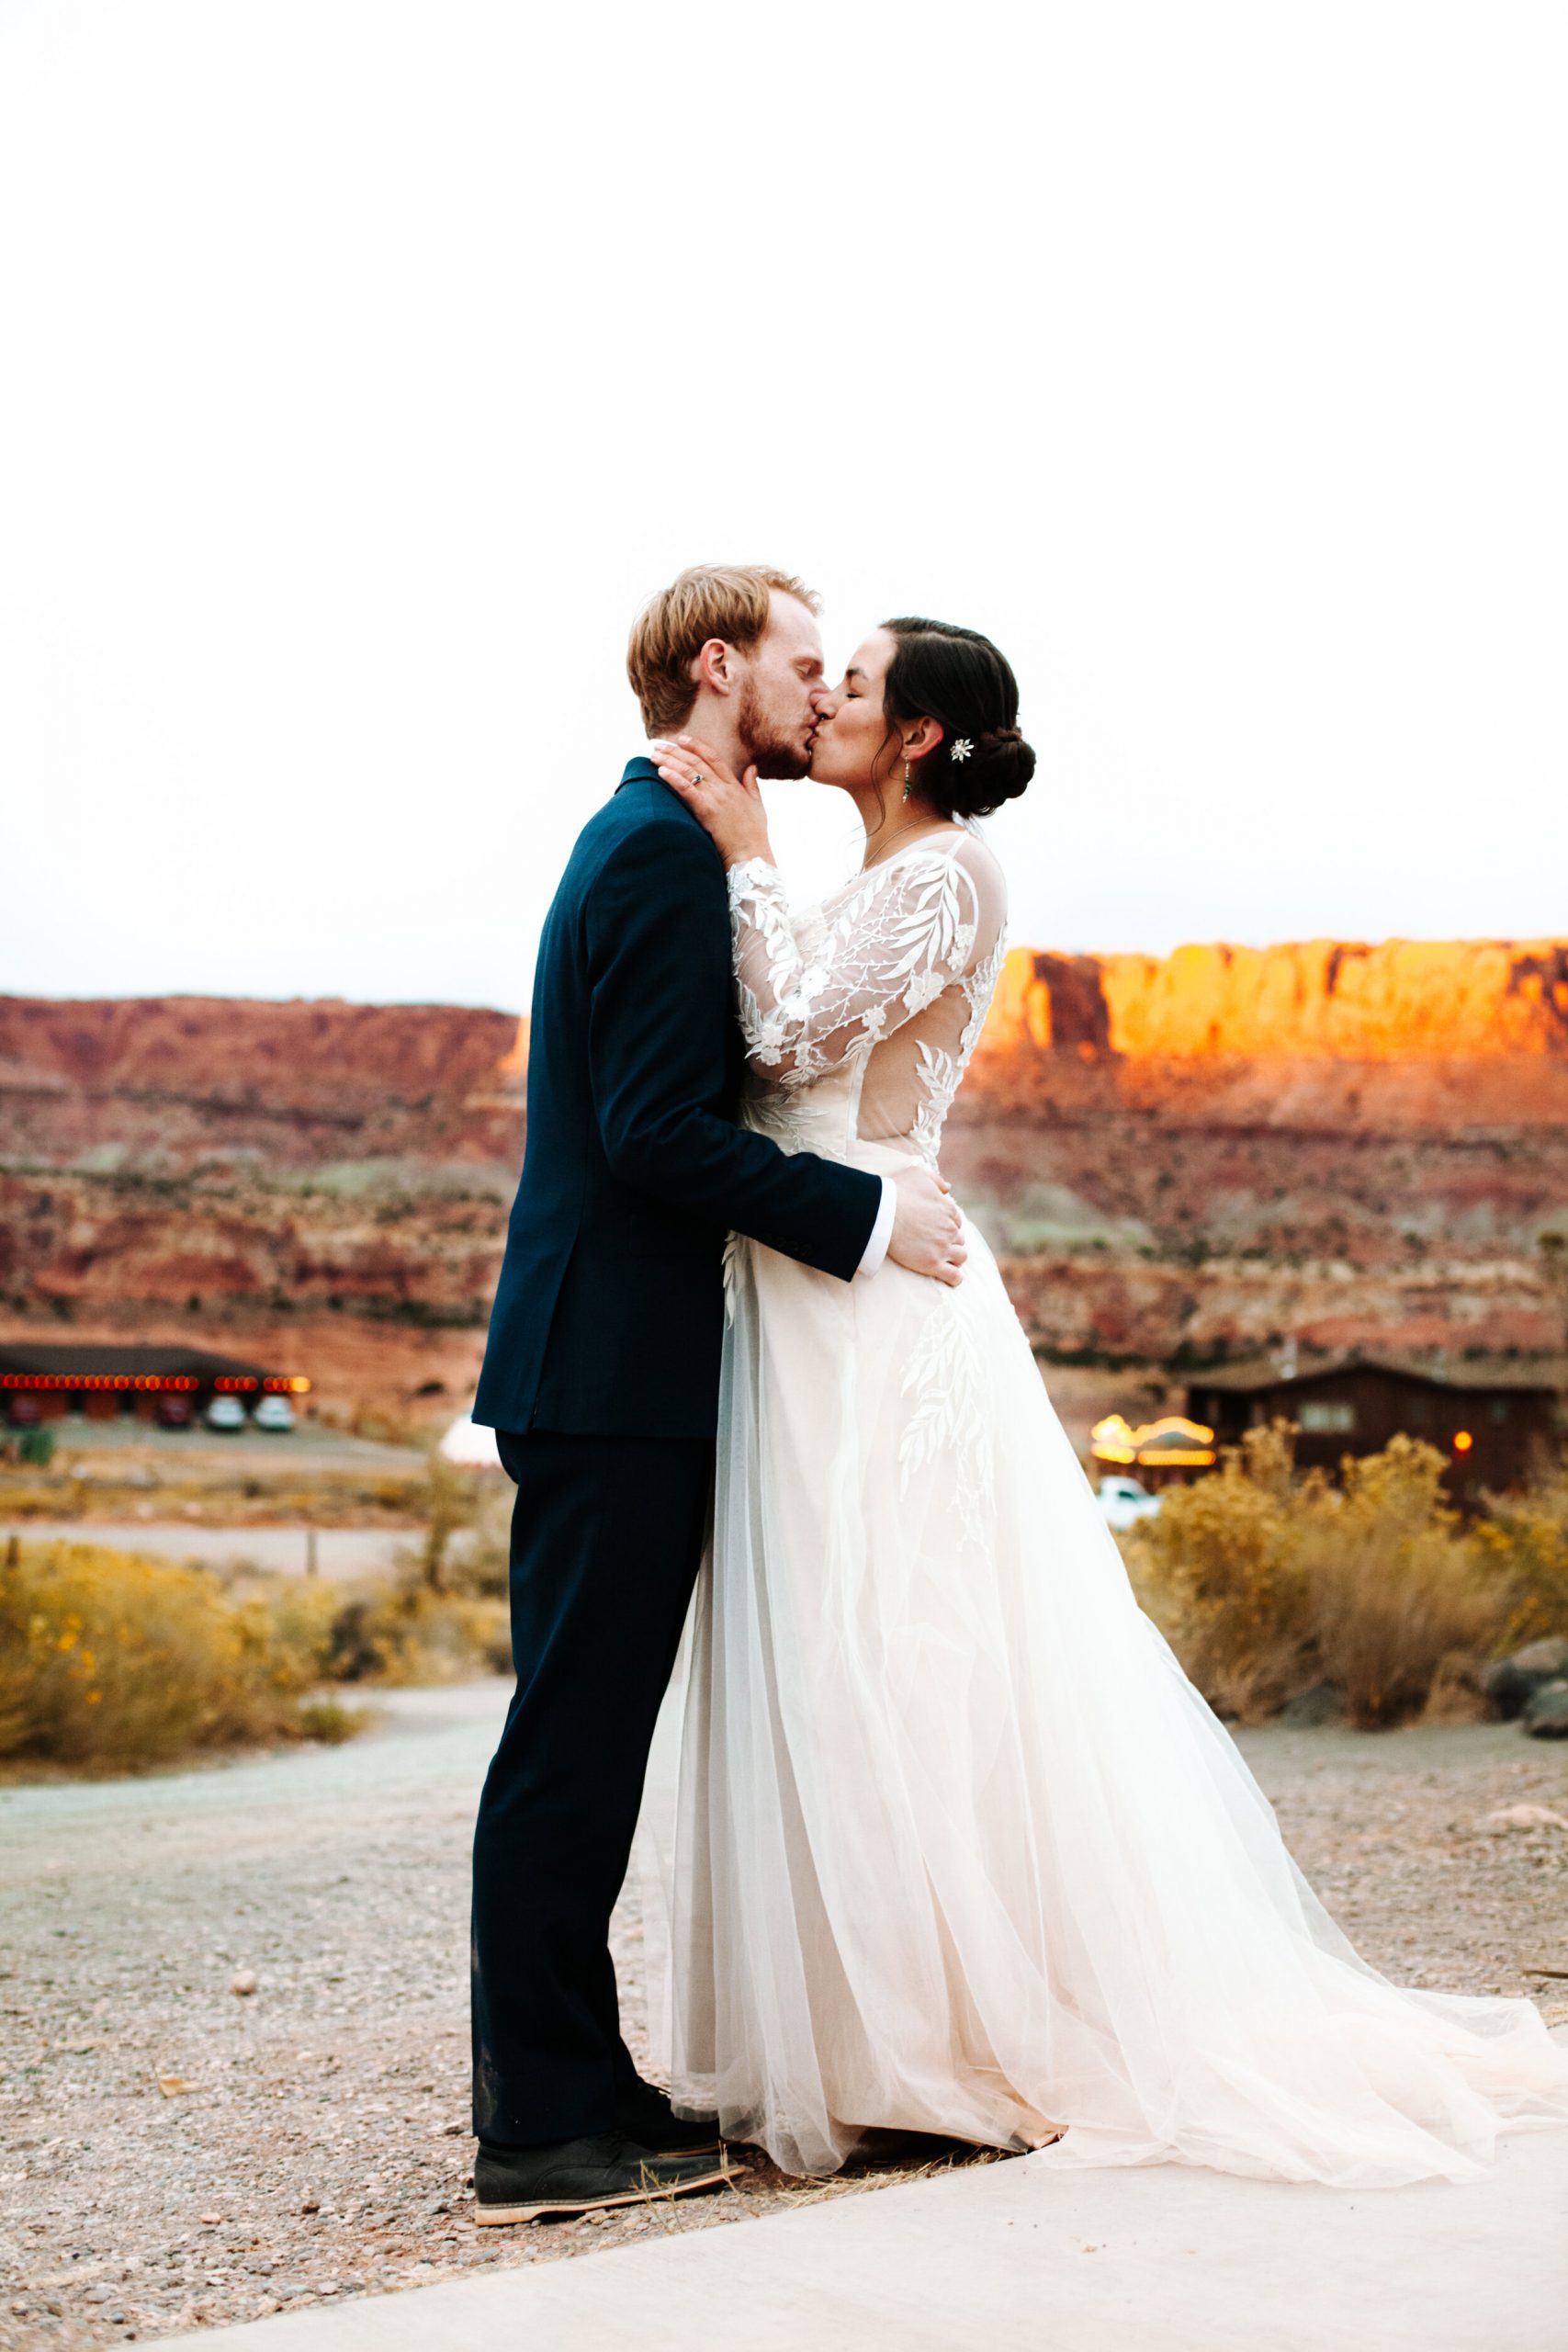 Couple kissing at their fall wedding in Moab, Utah.